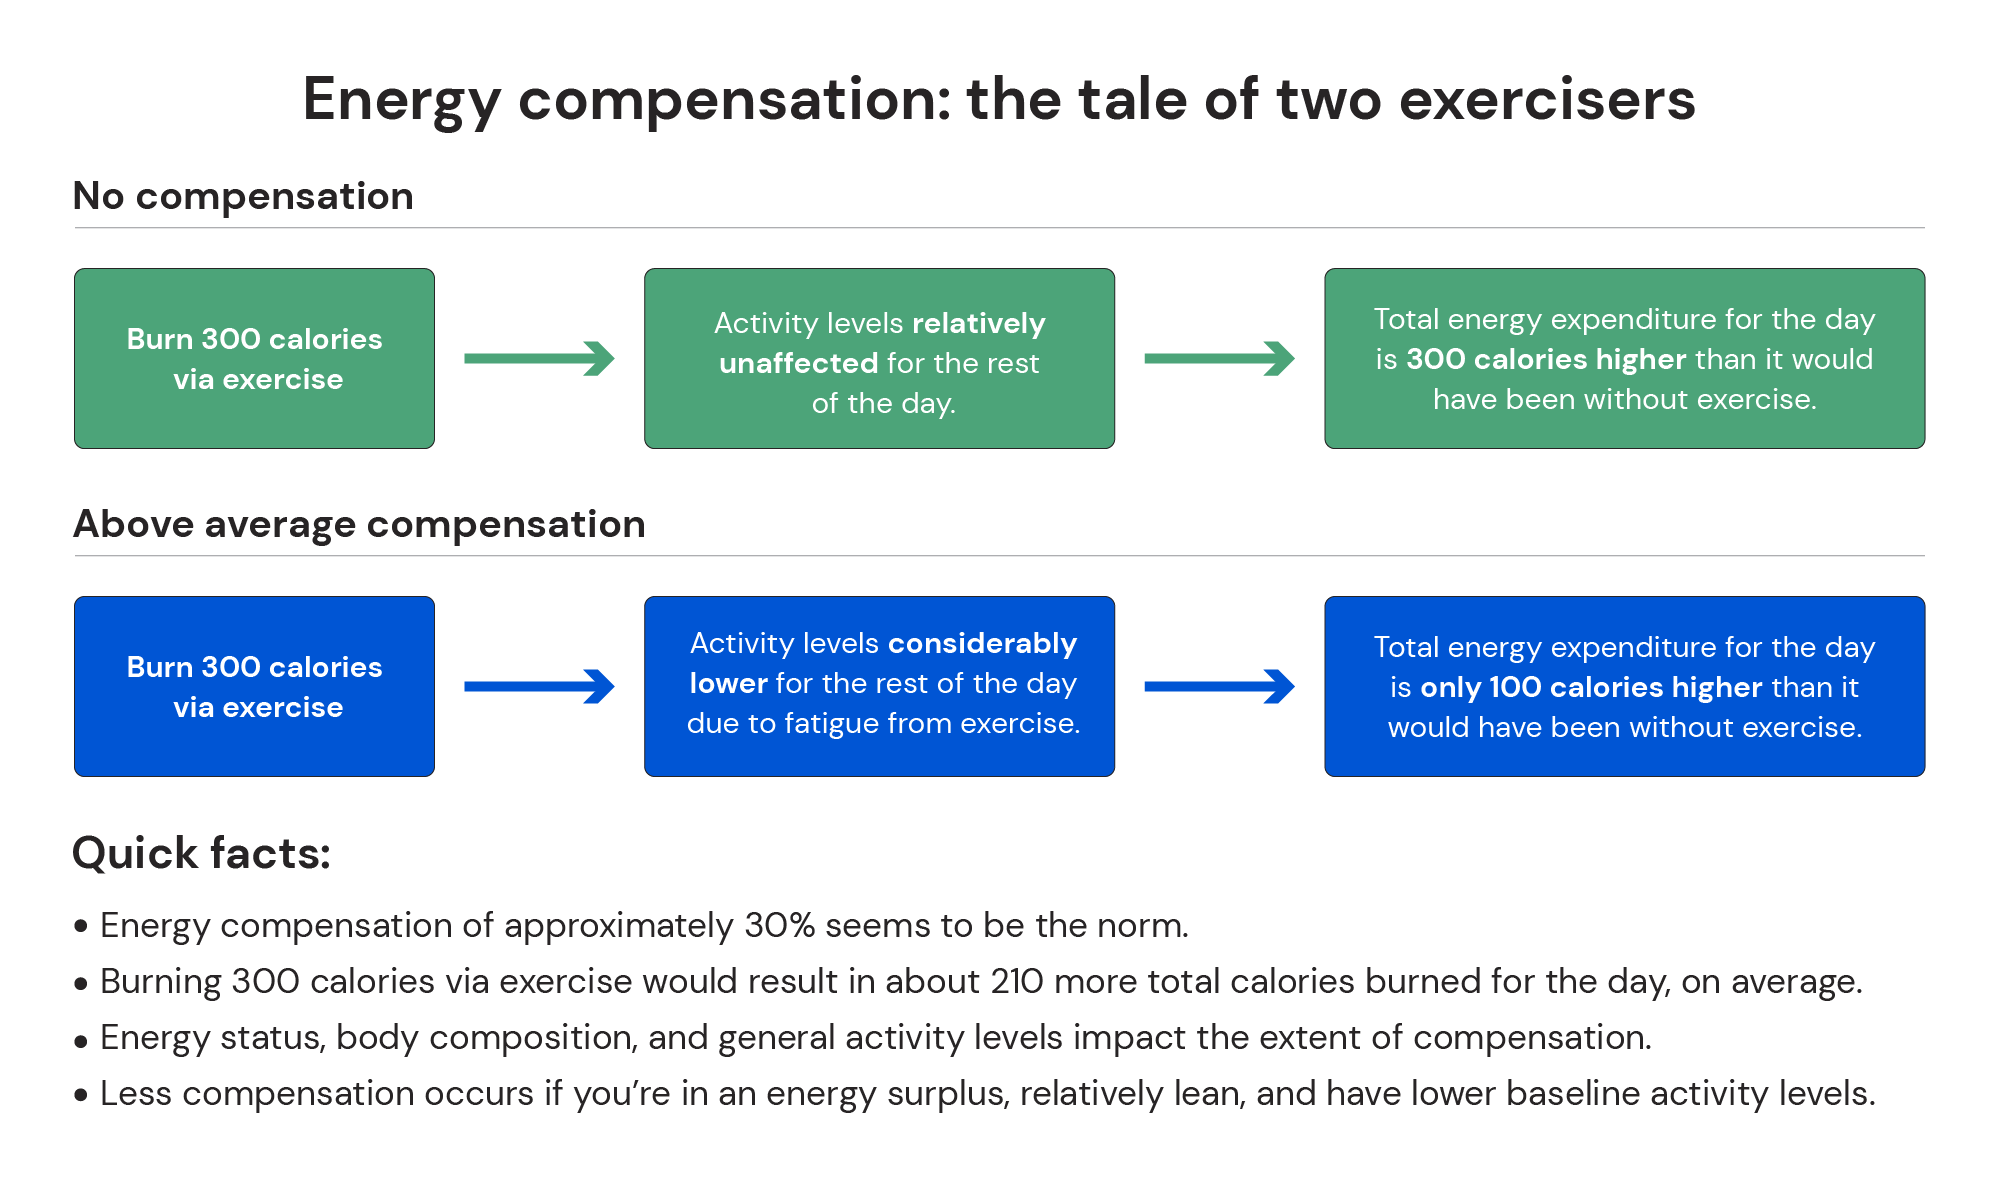 energy compensation: the tale of two exercisers